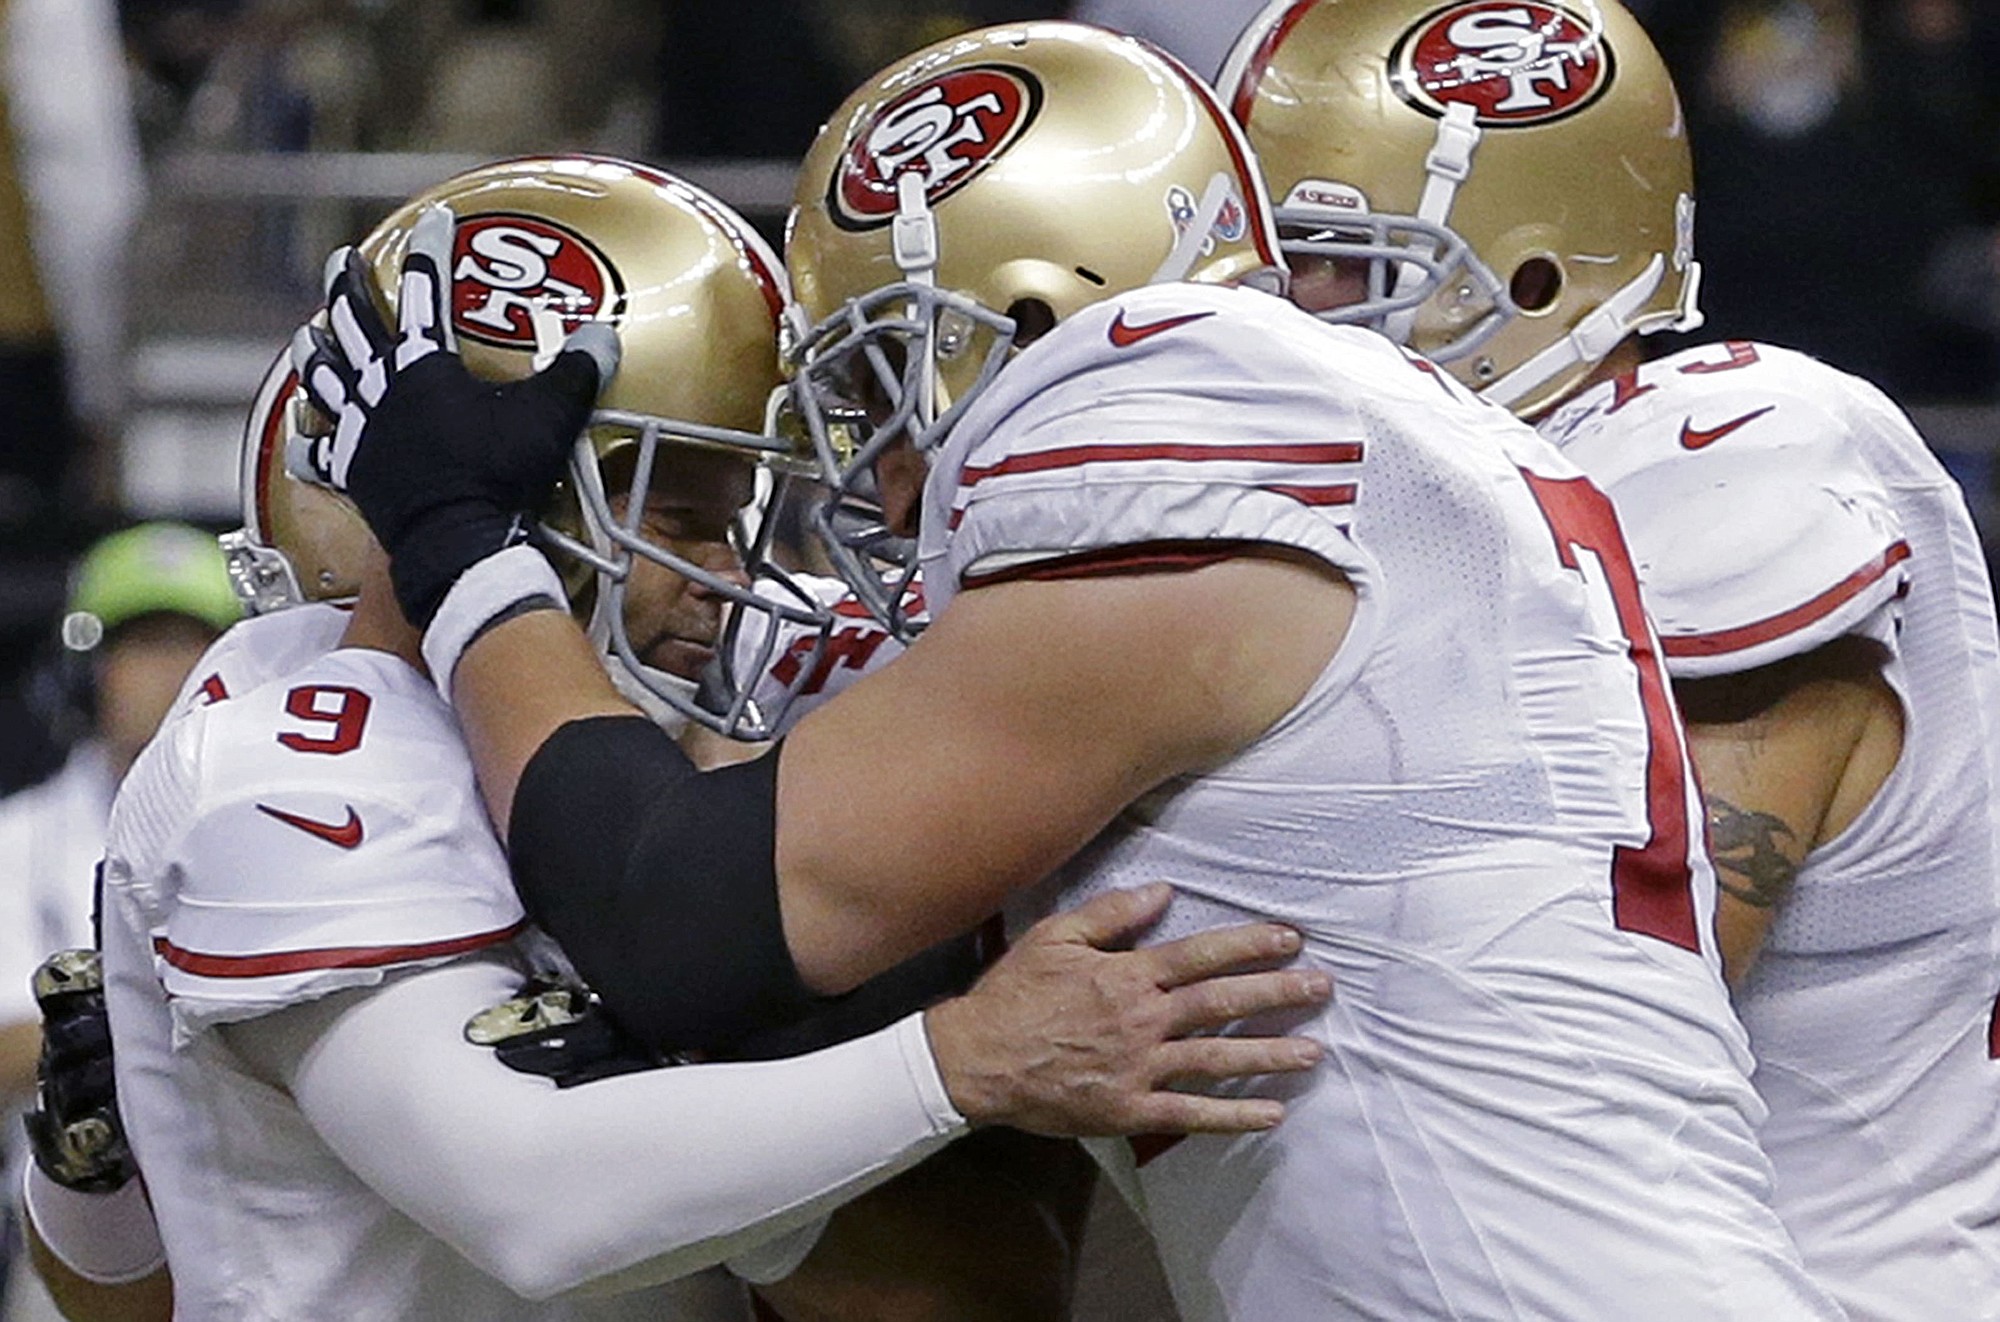 San Francisco 49ers kicker Phil Dawson (9) is congratulated by tackle Joe Staley (74) after kicking the game-winning field goal in overtime against the New Orleans Saints in New Orleans, Sunday, Nov. 9, 2014. The San Francisco 49ers won 27-24.